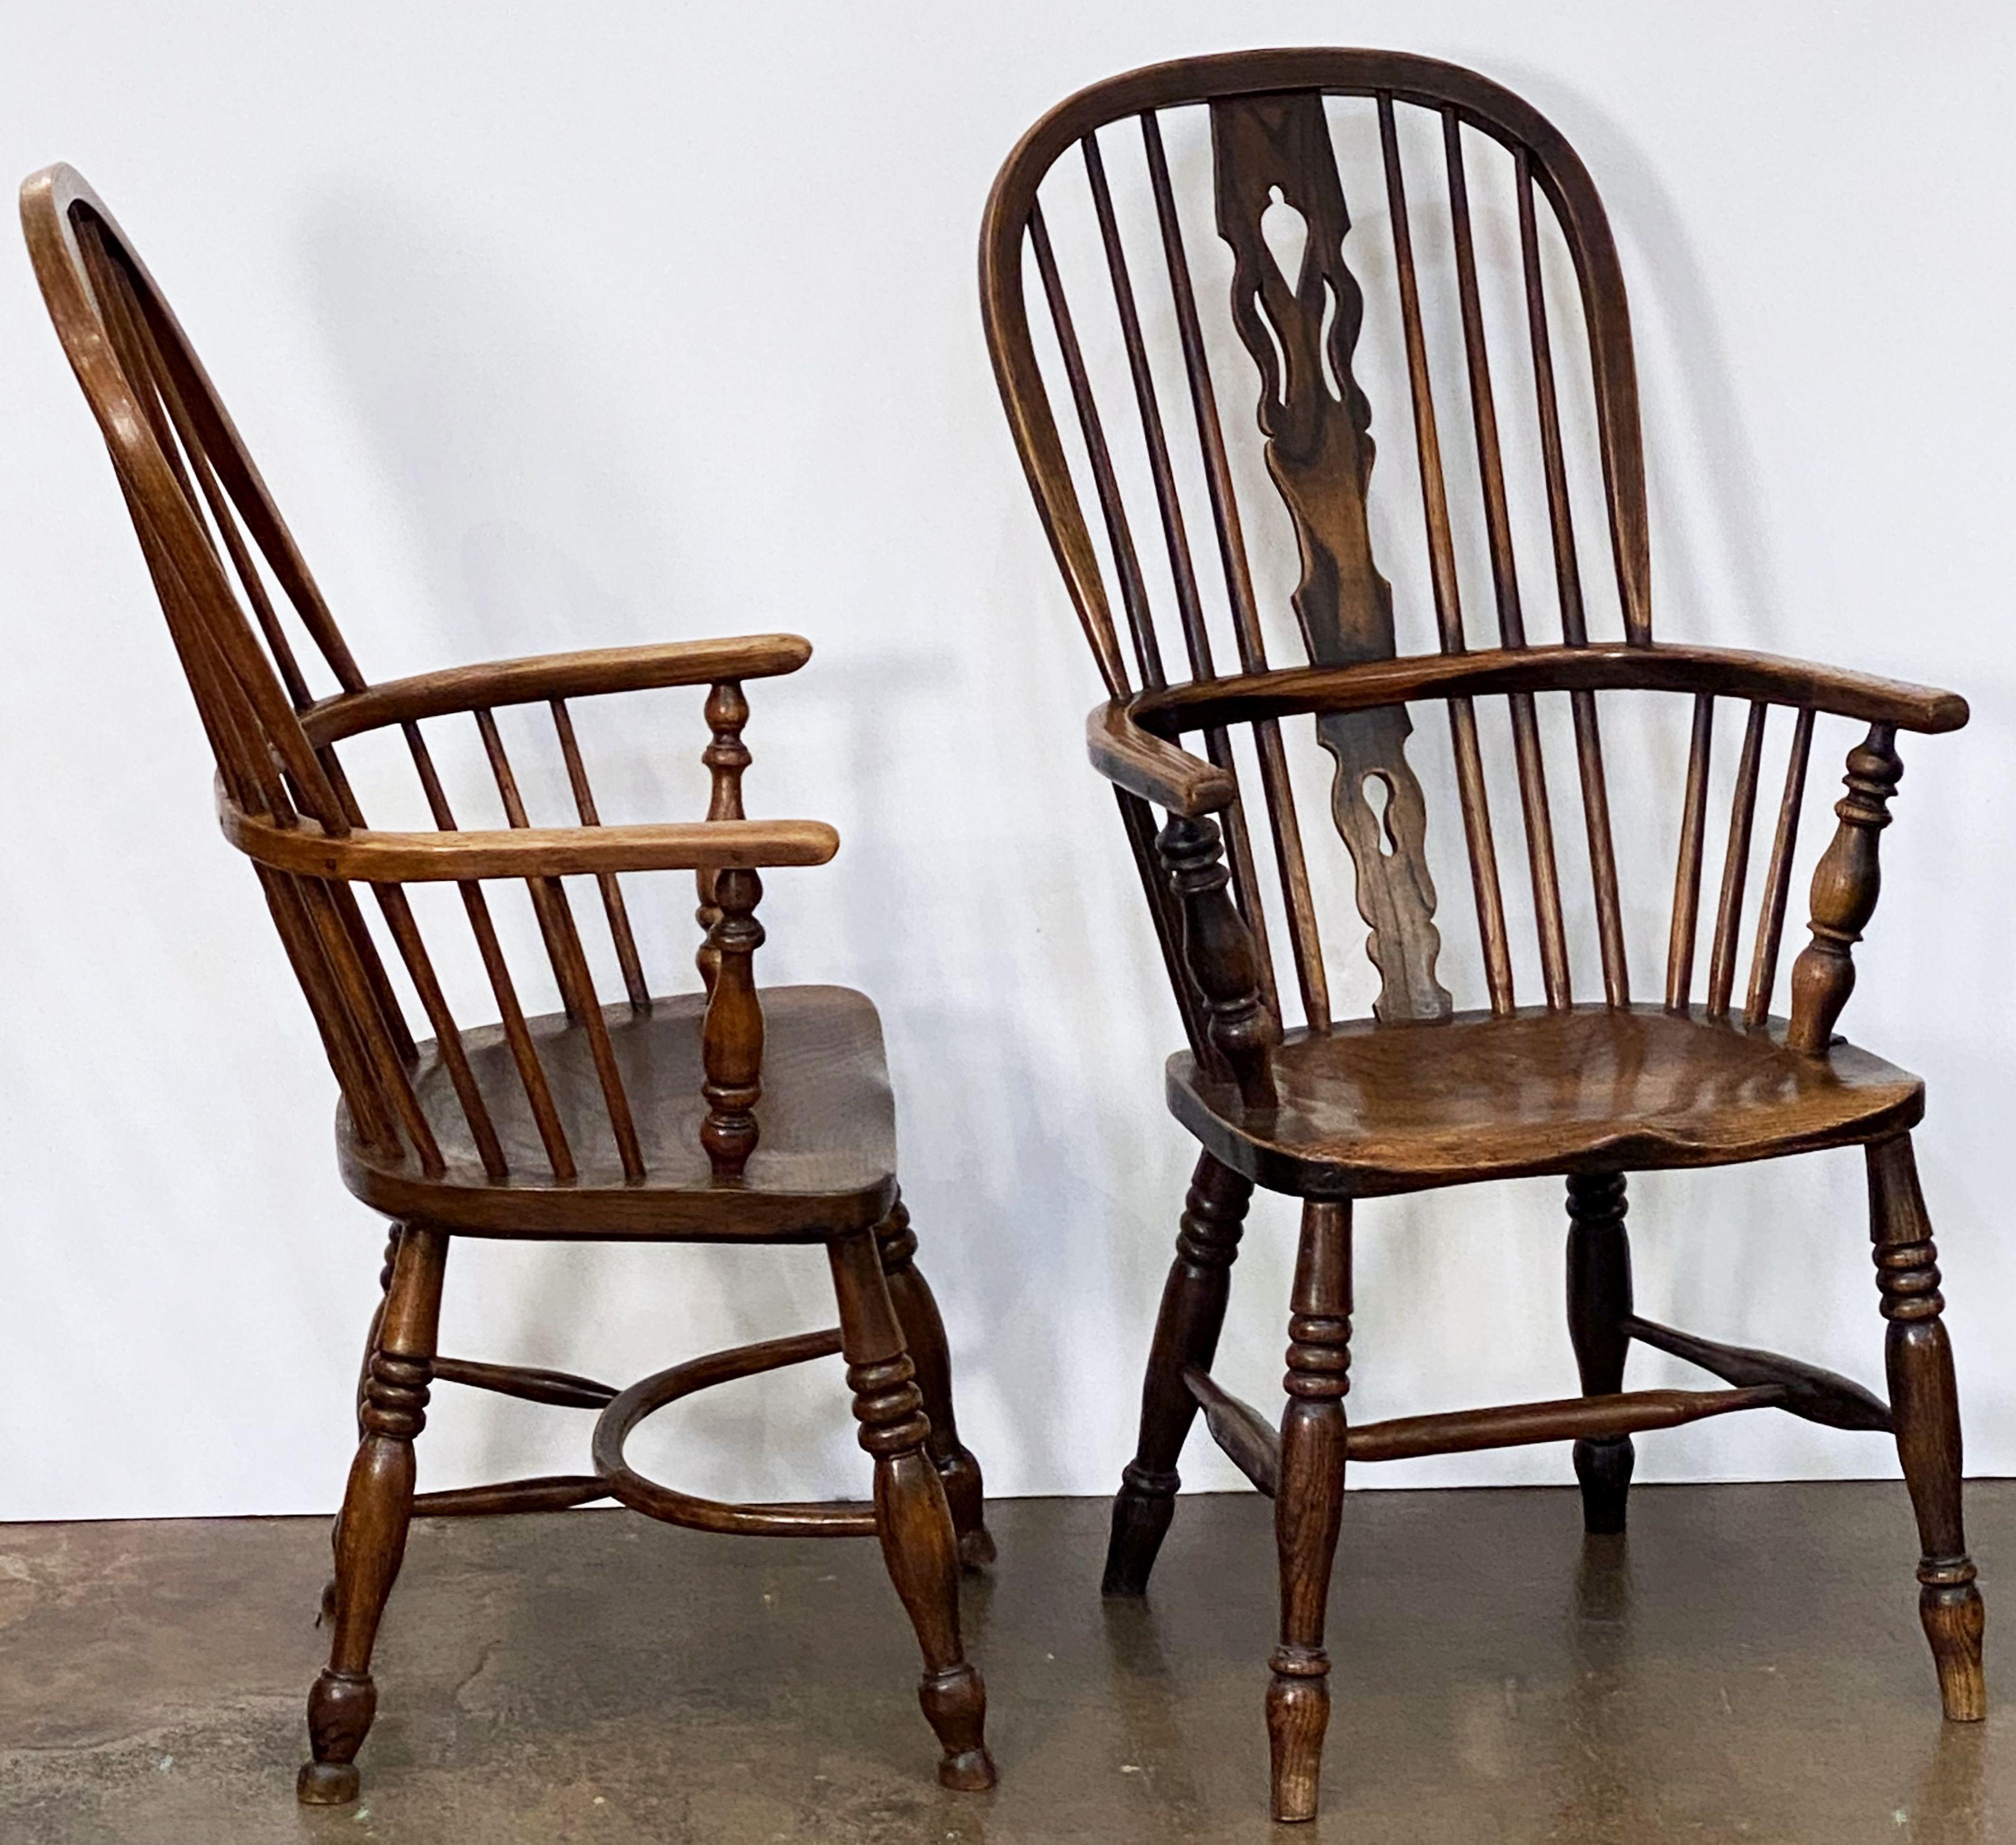 A harlequin set of eight handsome large English Windsor high back chairs, of elm, ash, and oak woods from the early 19th century - each chair featuring bowed top rails and pierced splats and spindle backs, with solid, comfortable seats on either